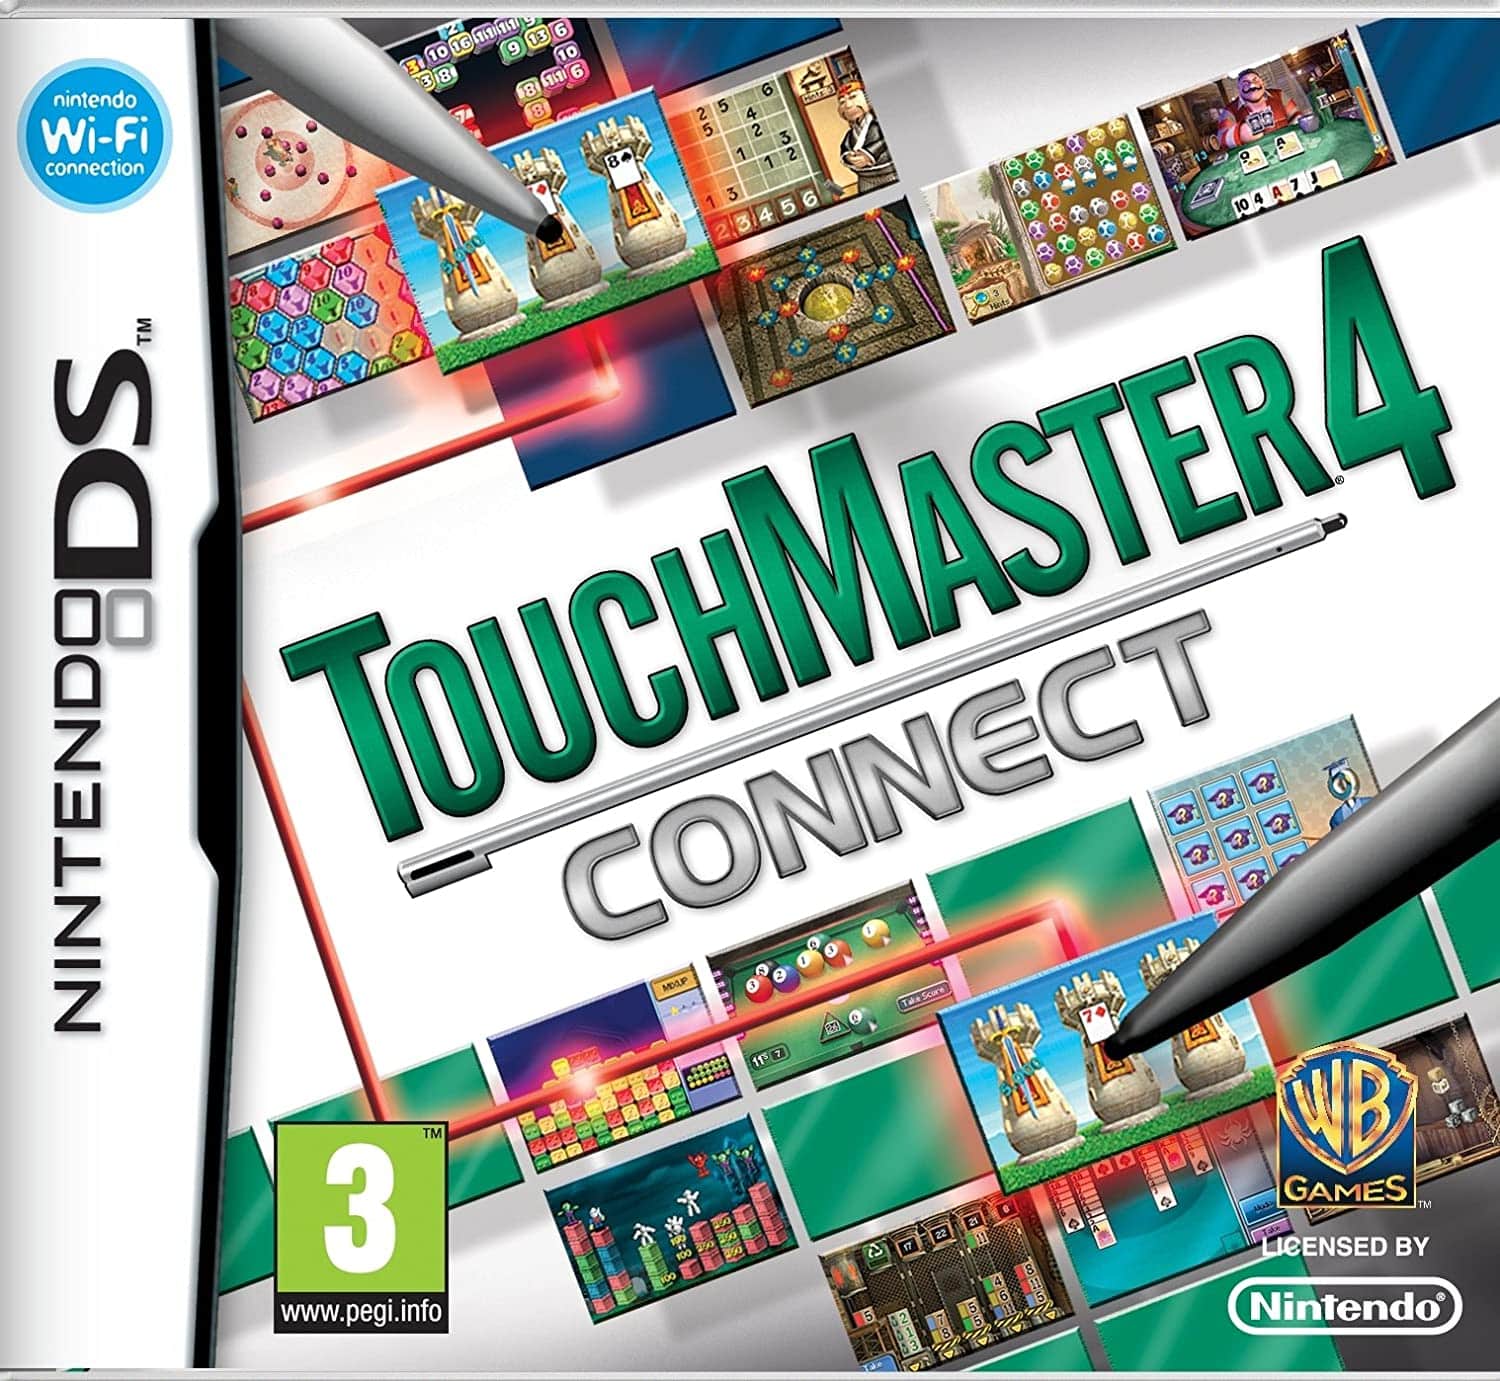 TouchMaster Connect player count stats